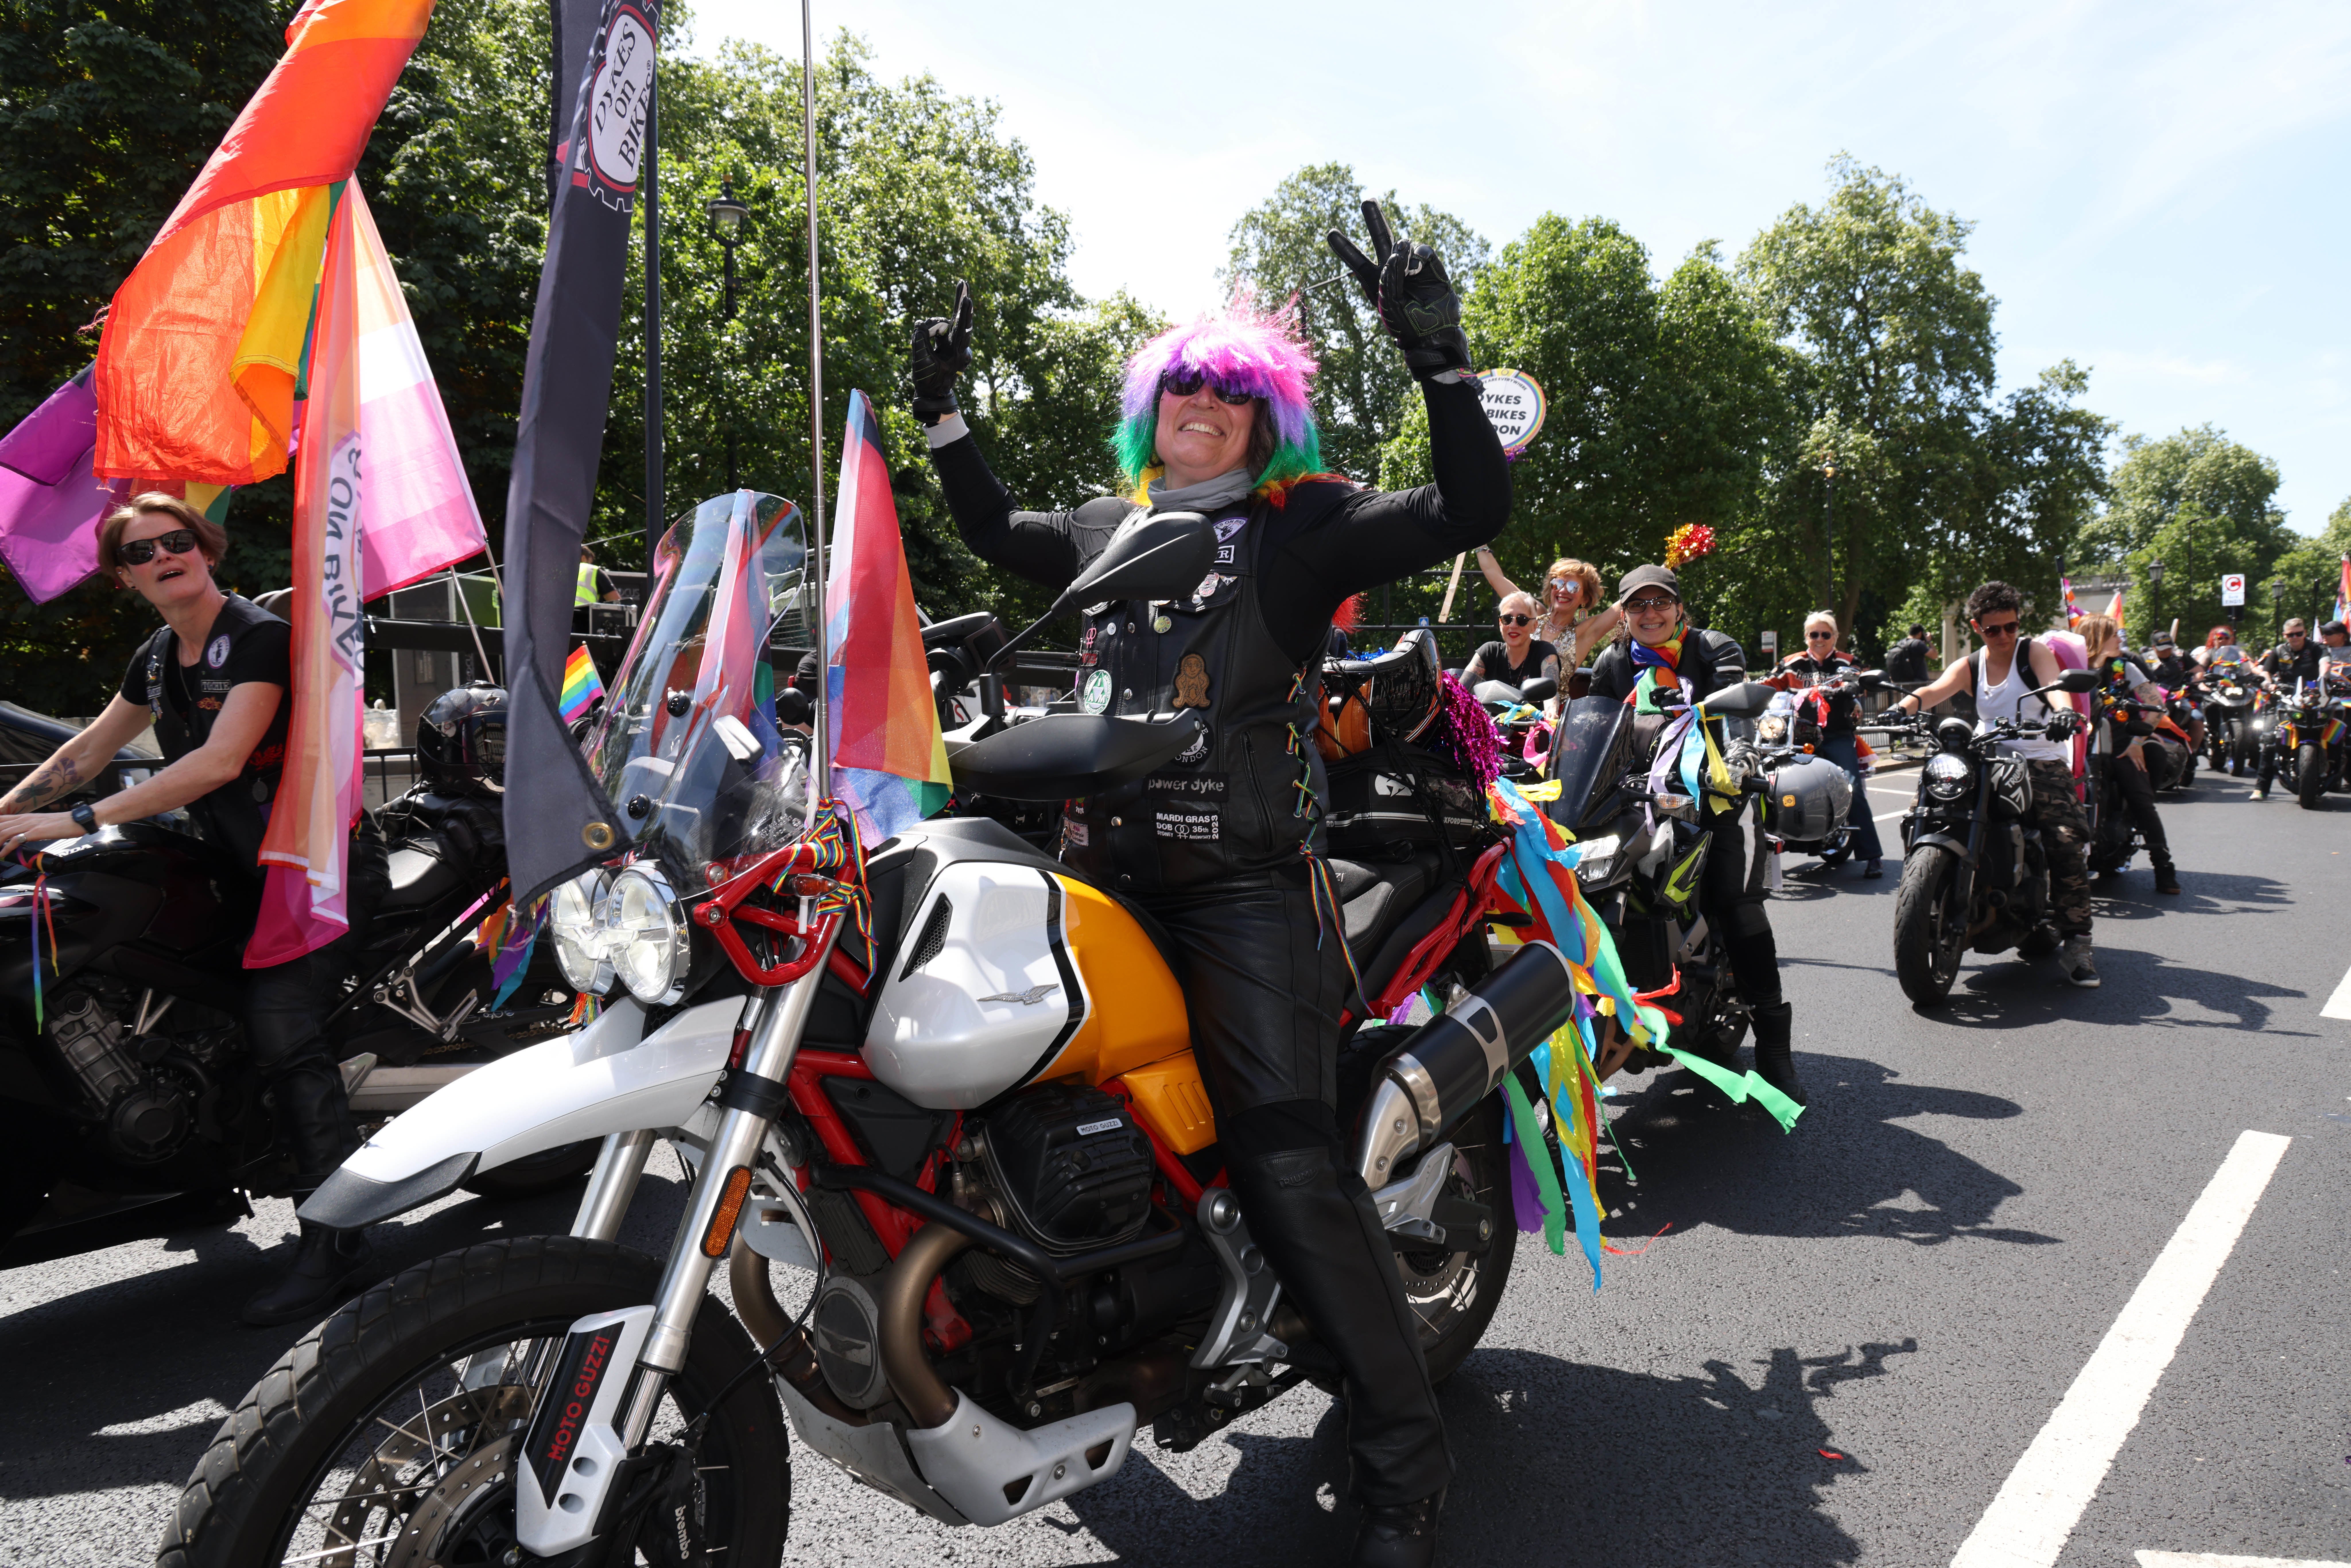 Bikers also took to the streets for the parade